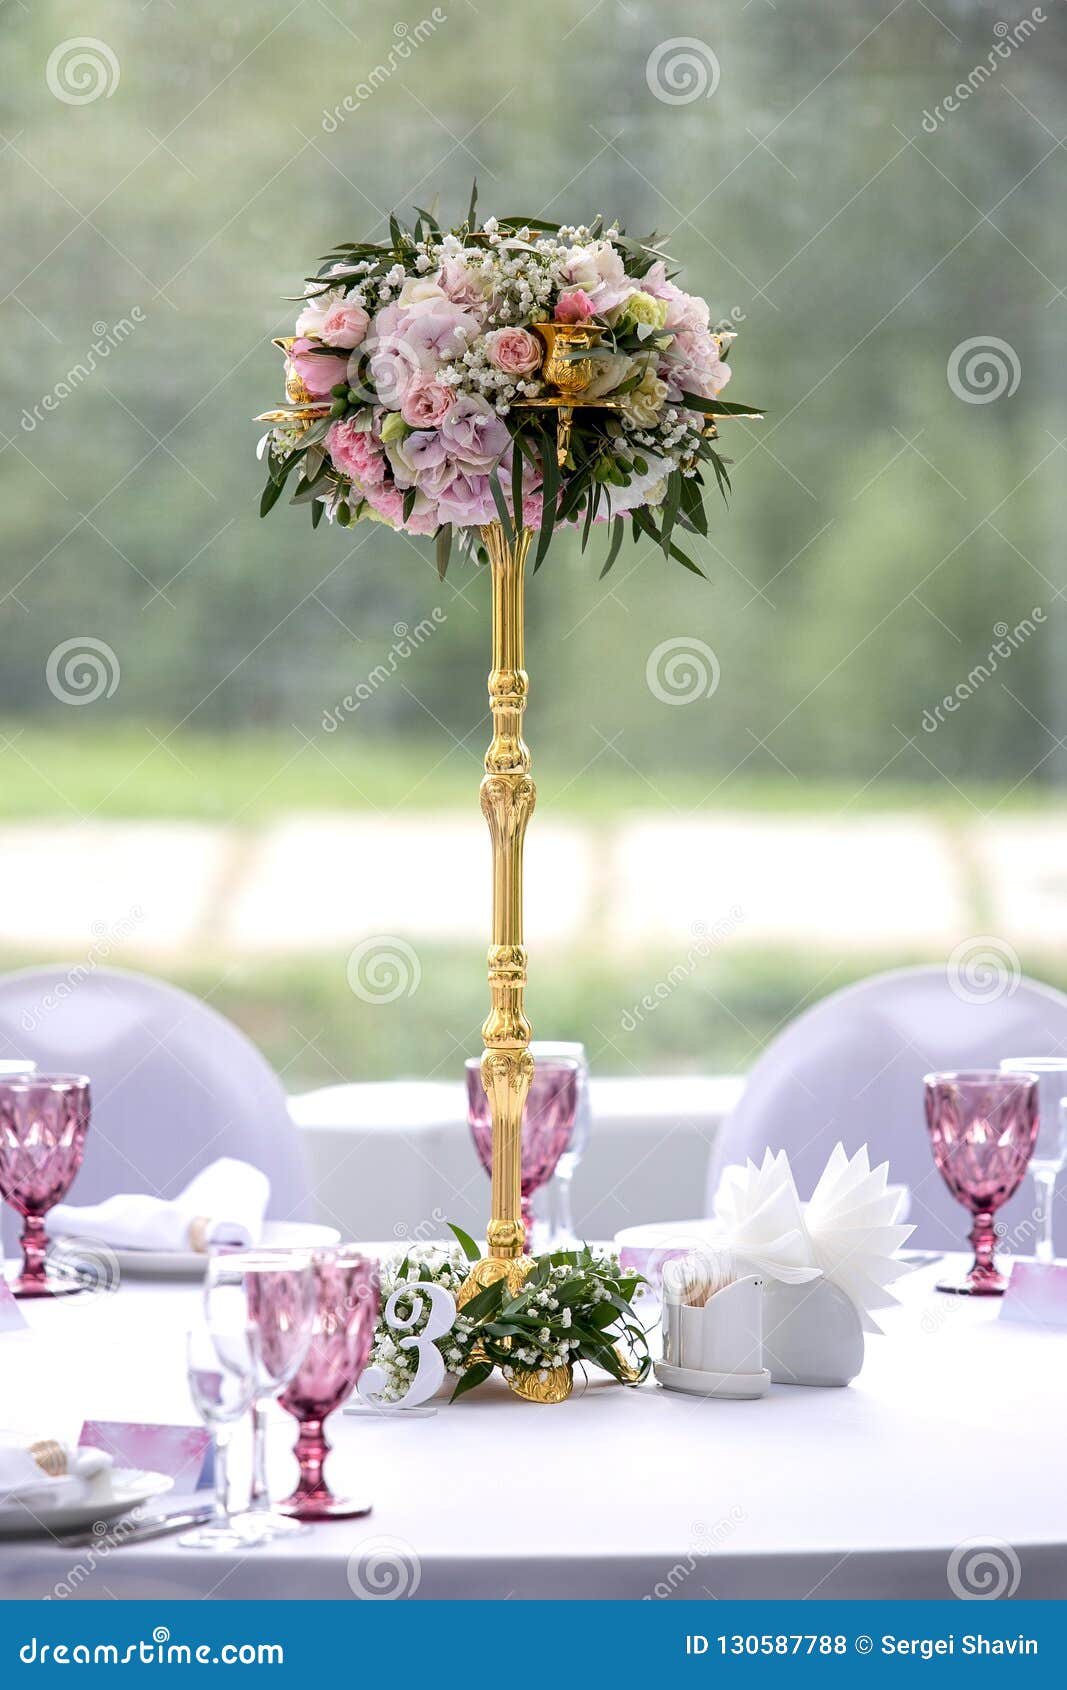 Beautiful Setting with Crockery and Arrangement in a Vase on a Stem for a Party, Wedding Reception or Other Stock Photo - Image of festive, banquet: 130587788